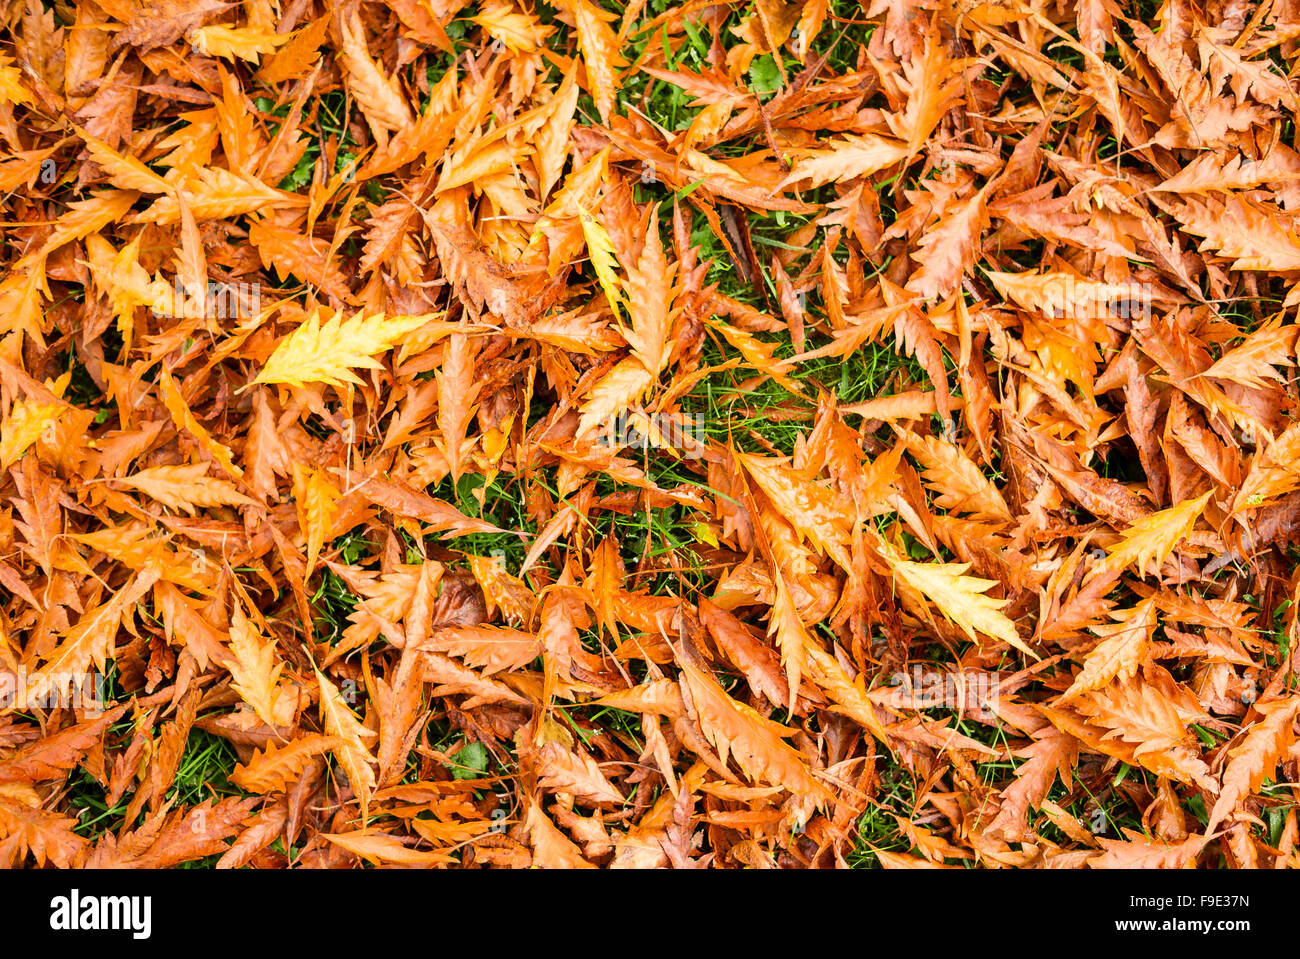 Fallen beech leaves on a lawn forming a carpet of golden brown hues Stock Photo